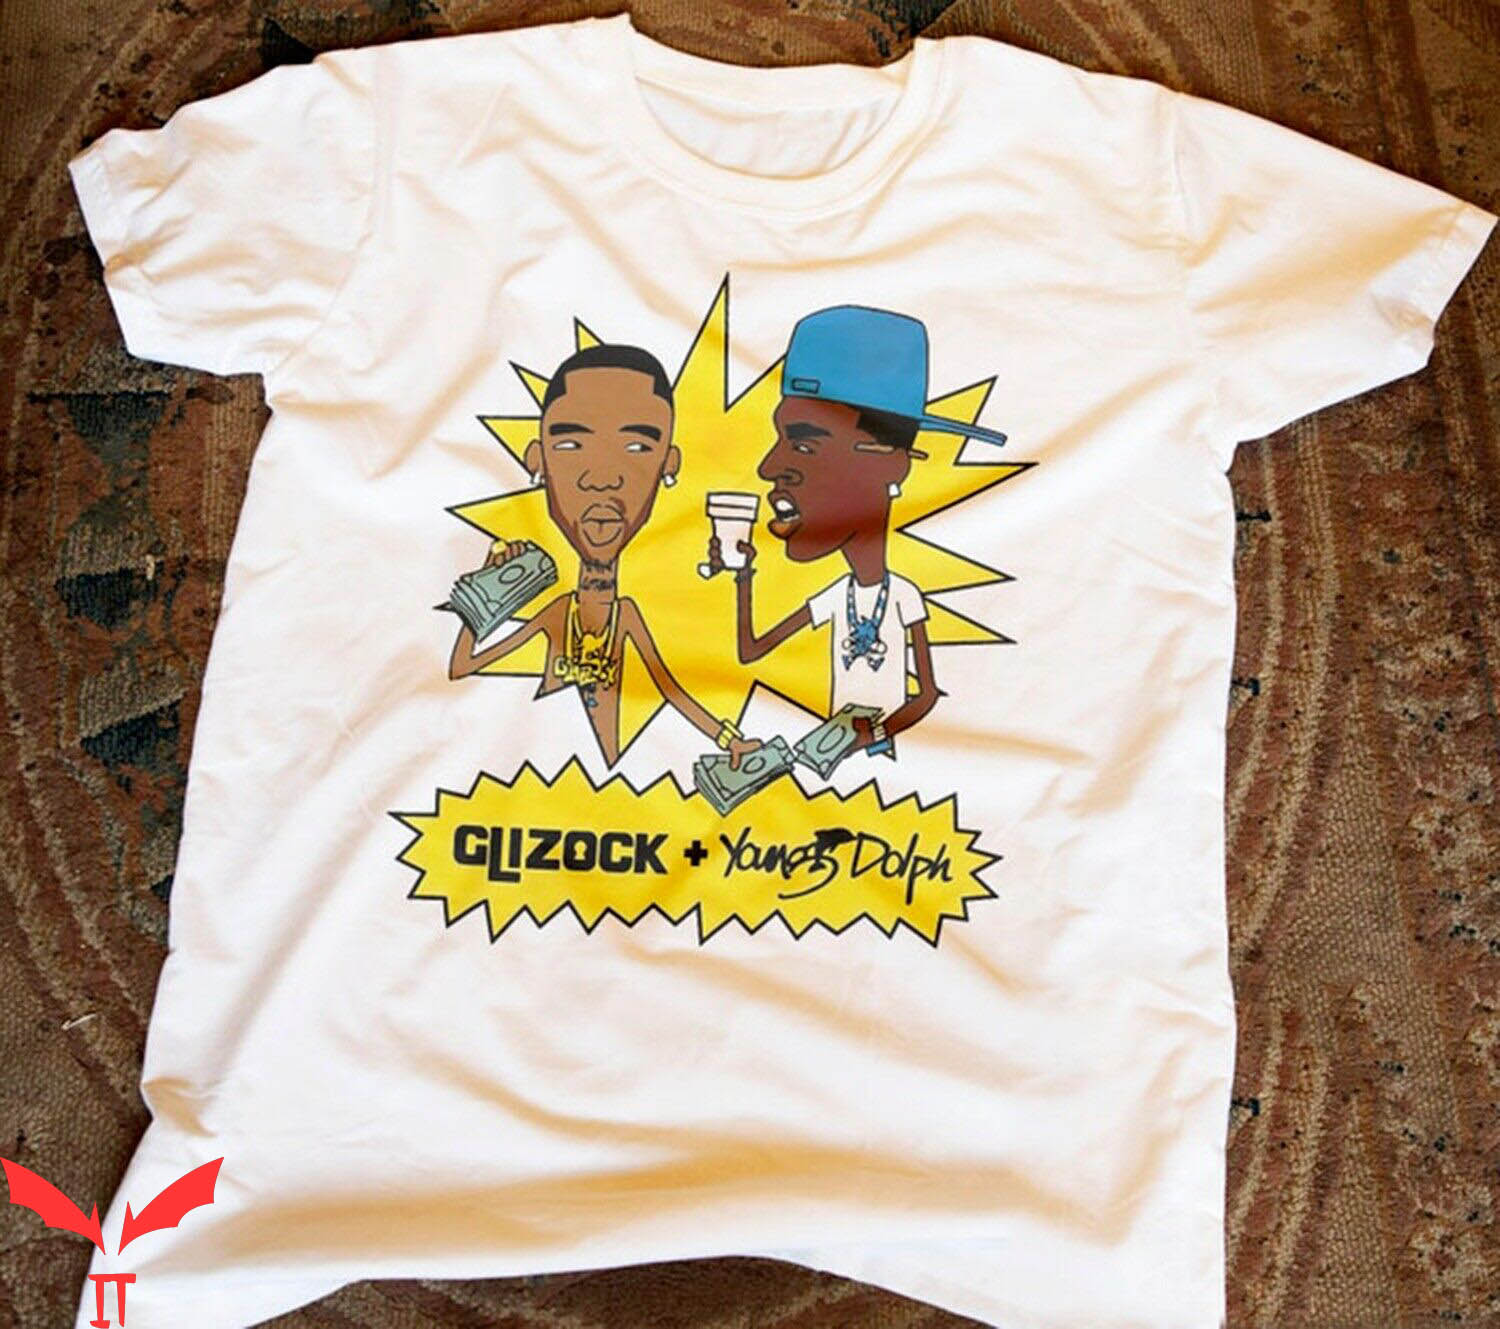 Key Glock T-Shirt Glizock Young Dolph Rich Style Tee Shirt